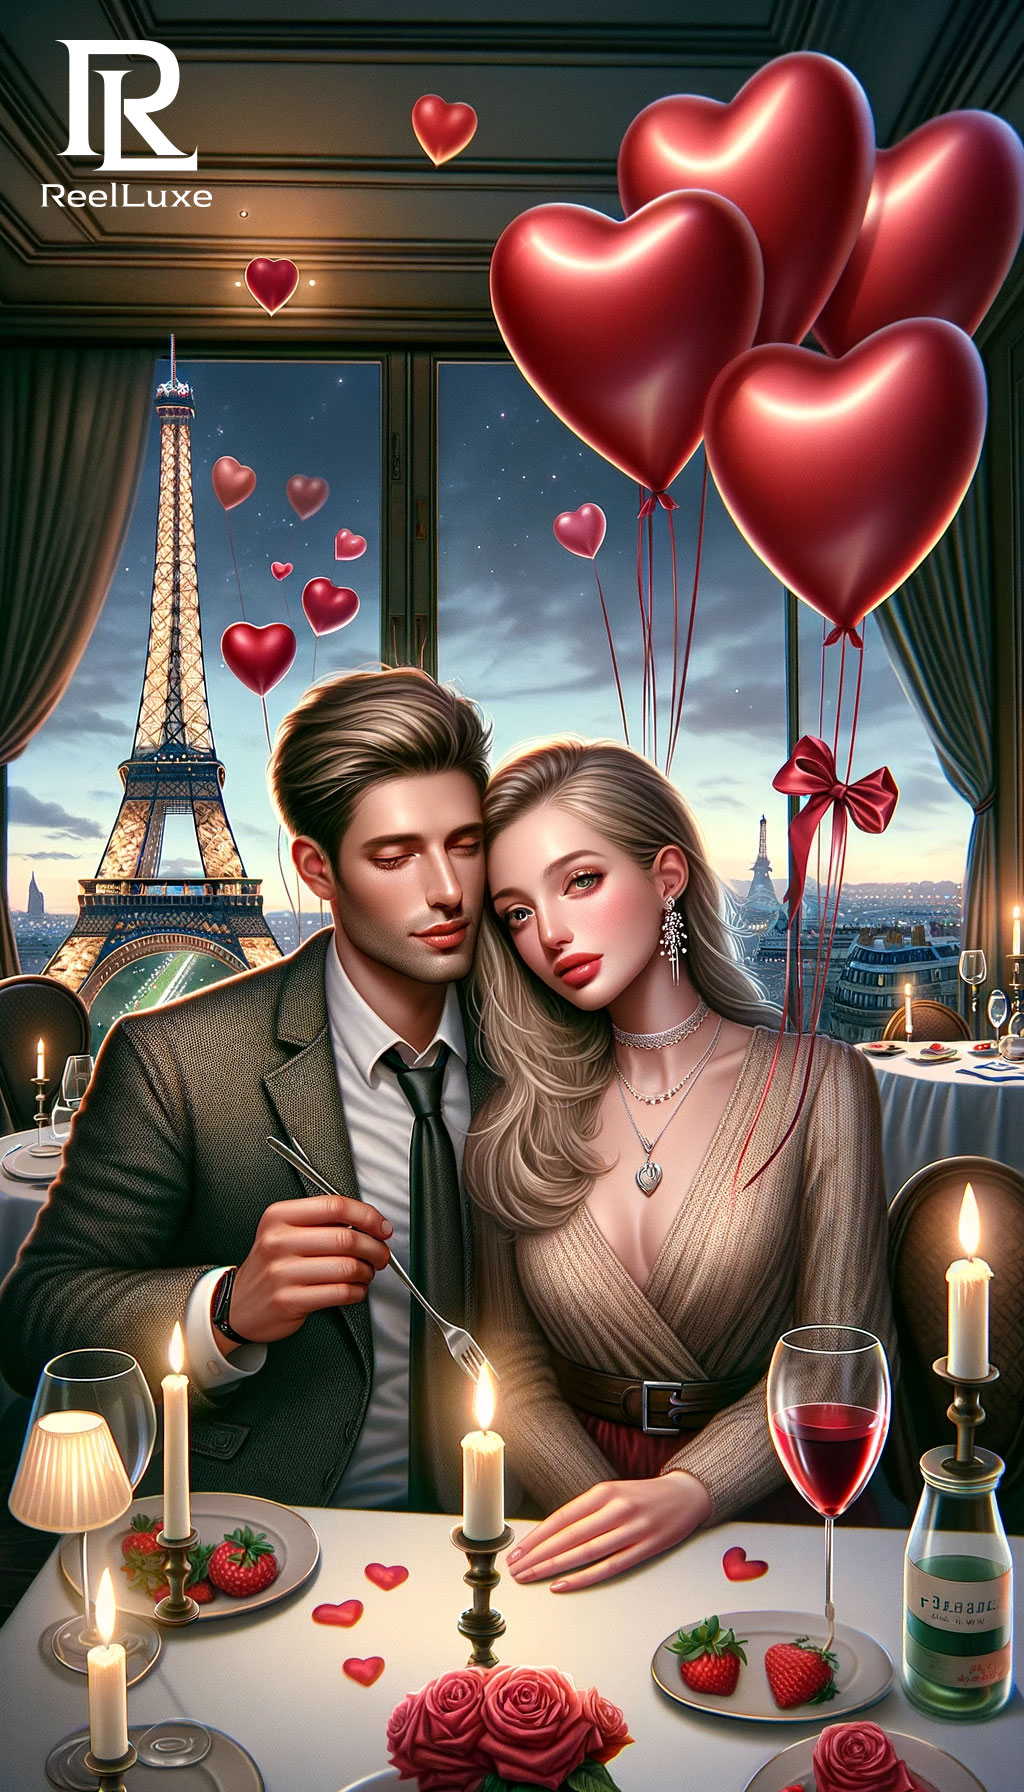 Romance in the Air - Valentine's Day - Beauty and Fashion - Paris, France - 5